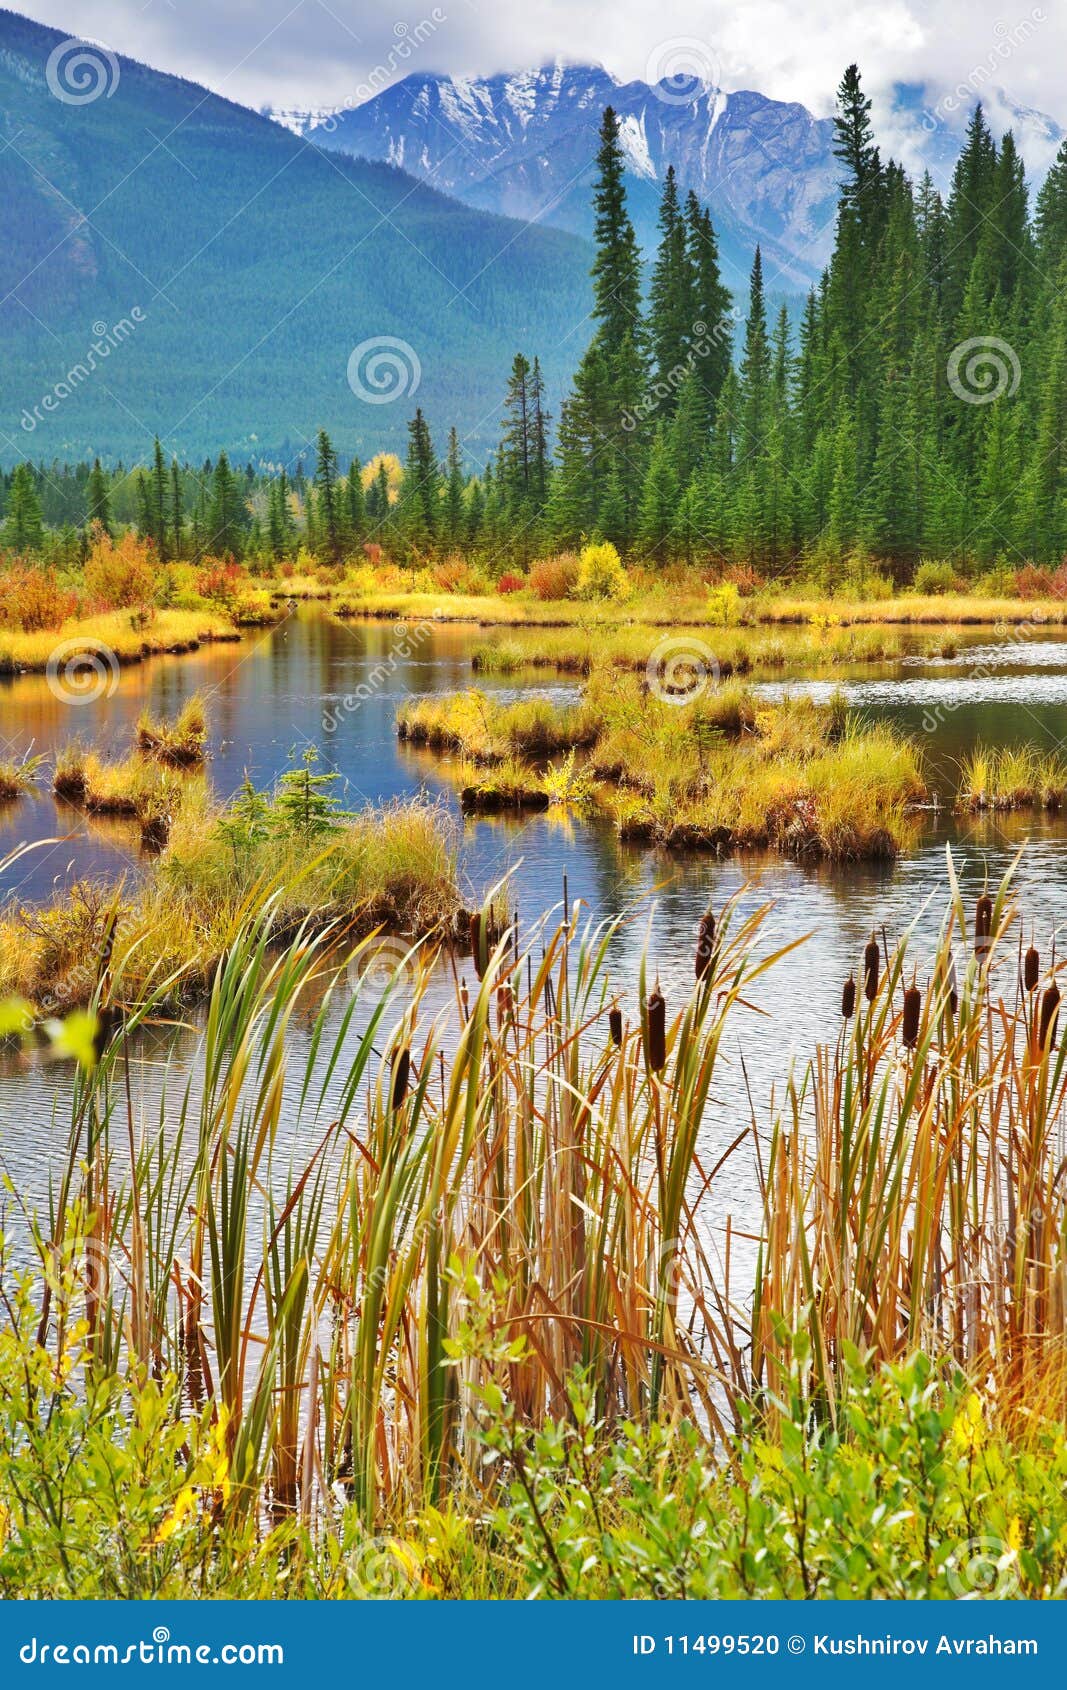 picturesque lake with small islets